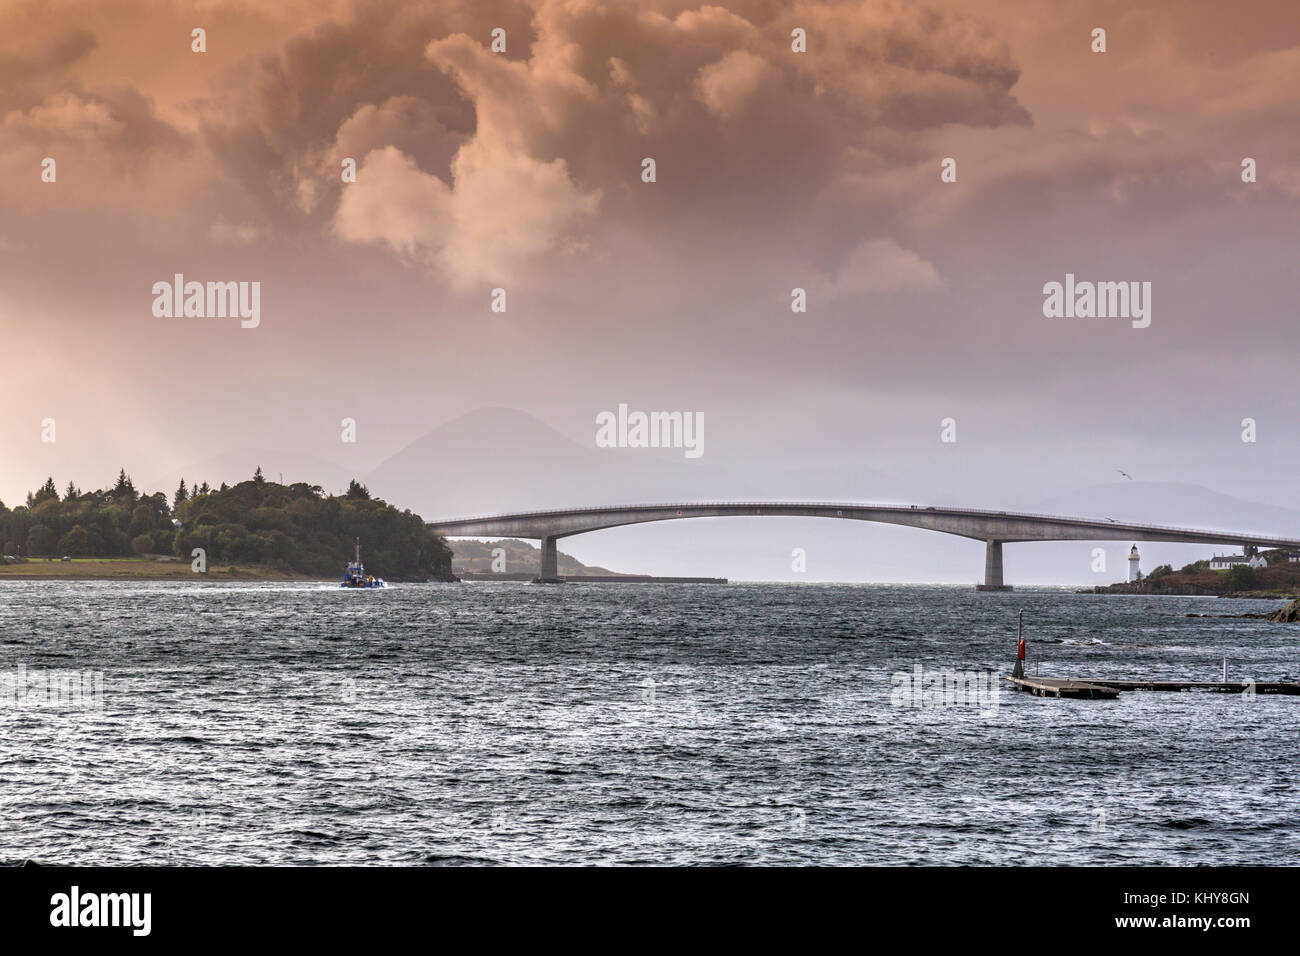 The Skye Bridge crosses the Kyle of Lochalsh and has connected the Isle of Skye with the mainland since 1995, Highland, Scotland, UK Stock Photo